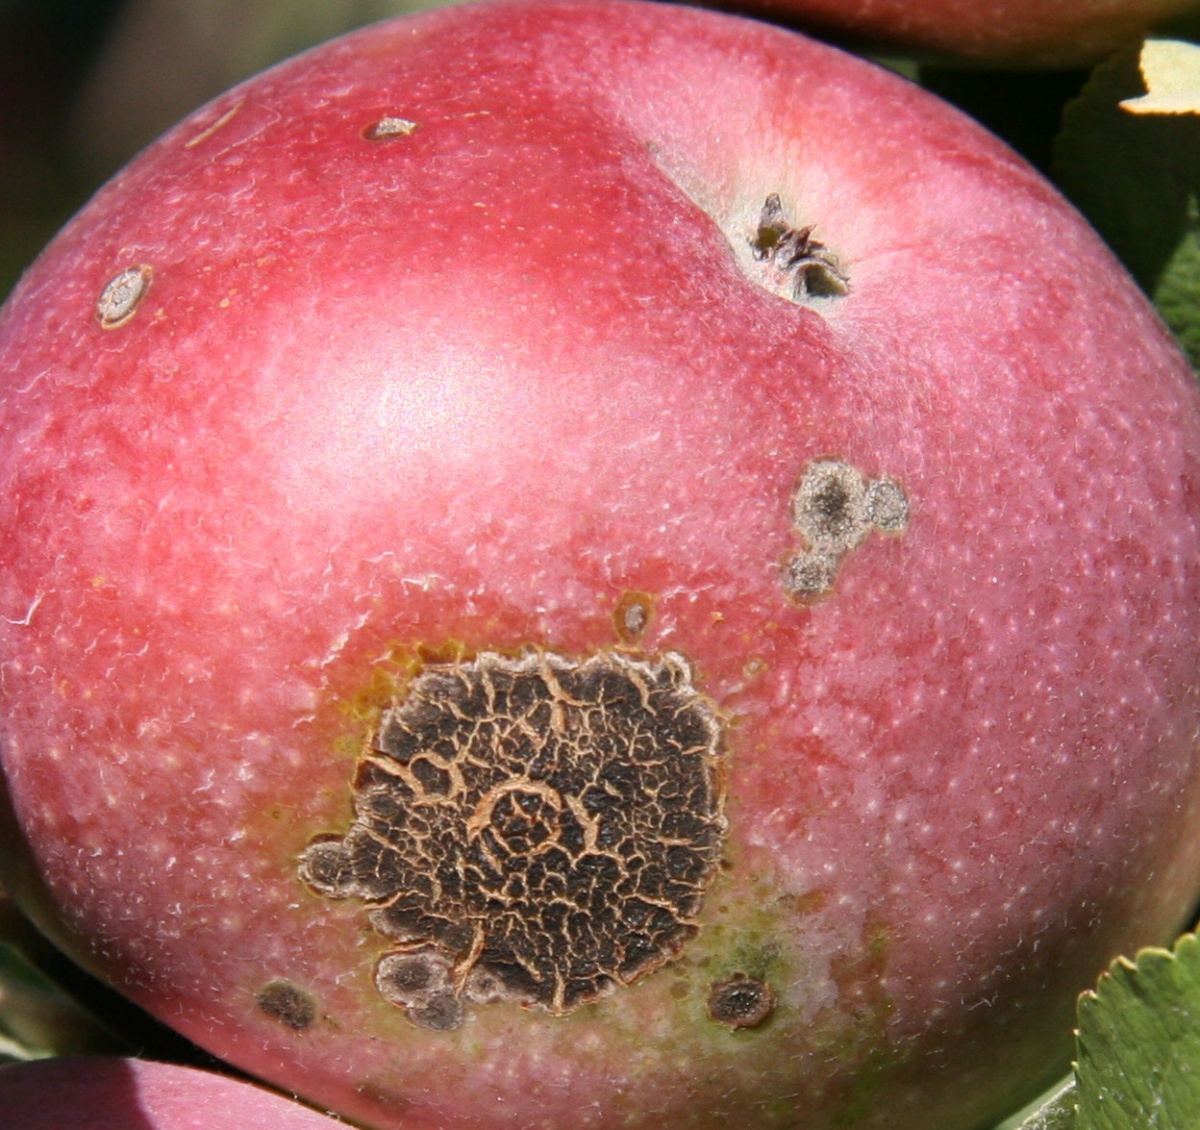 Red-fleshed: The science behind an uncommon apple breed - Fruit Growers News